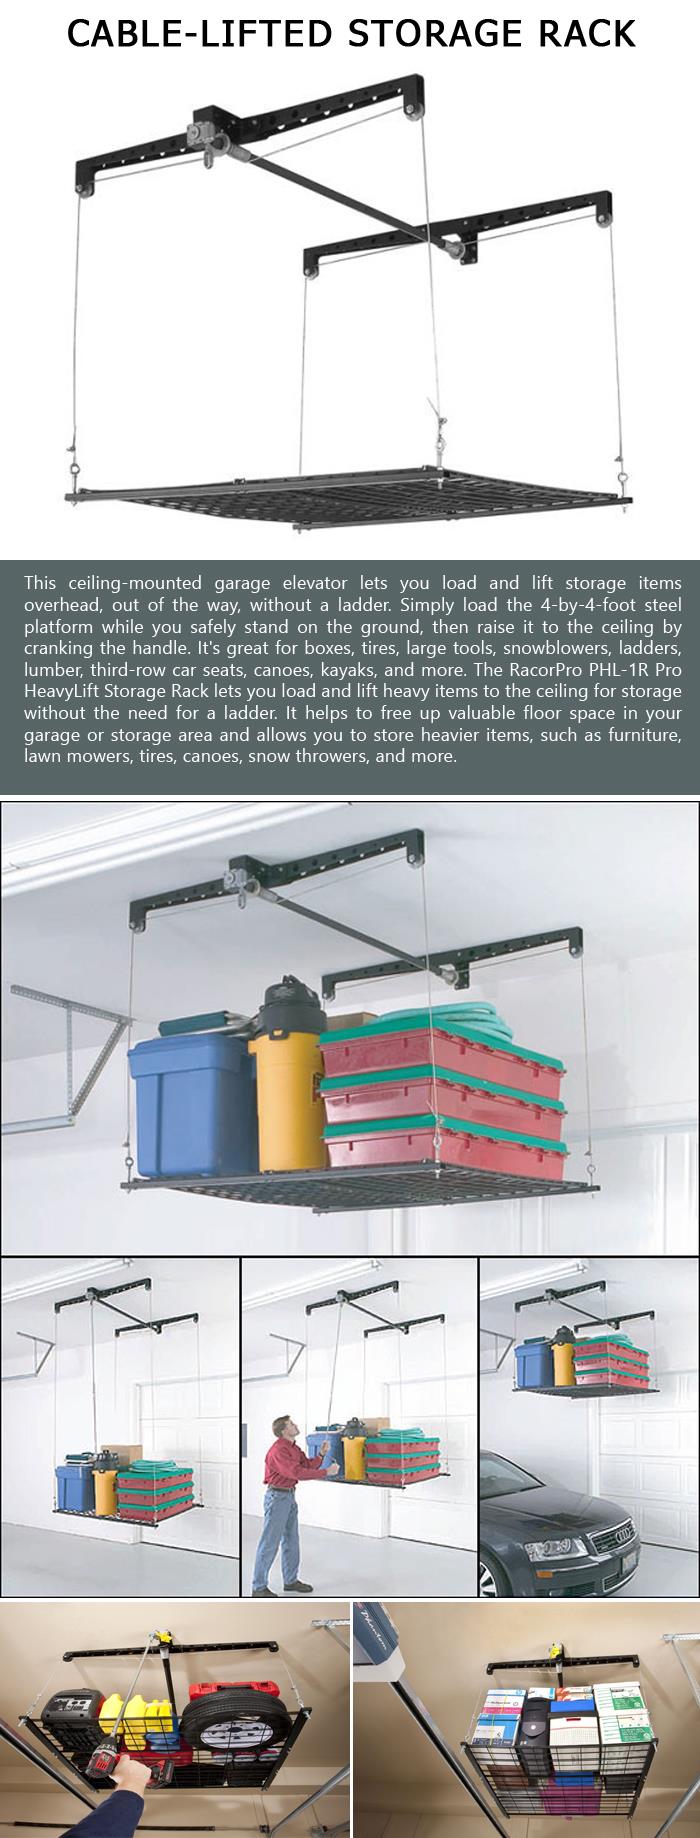 Cable-Lifted Storage Rack